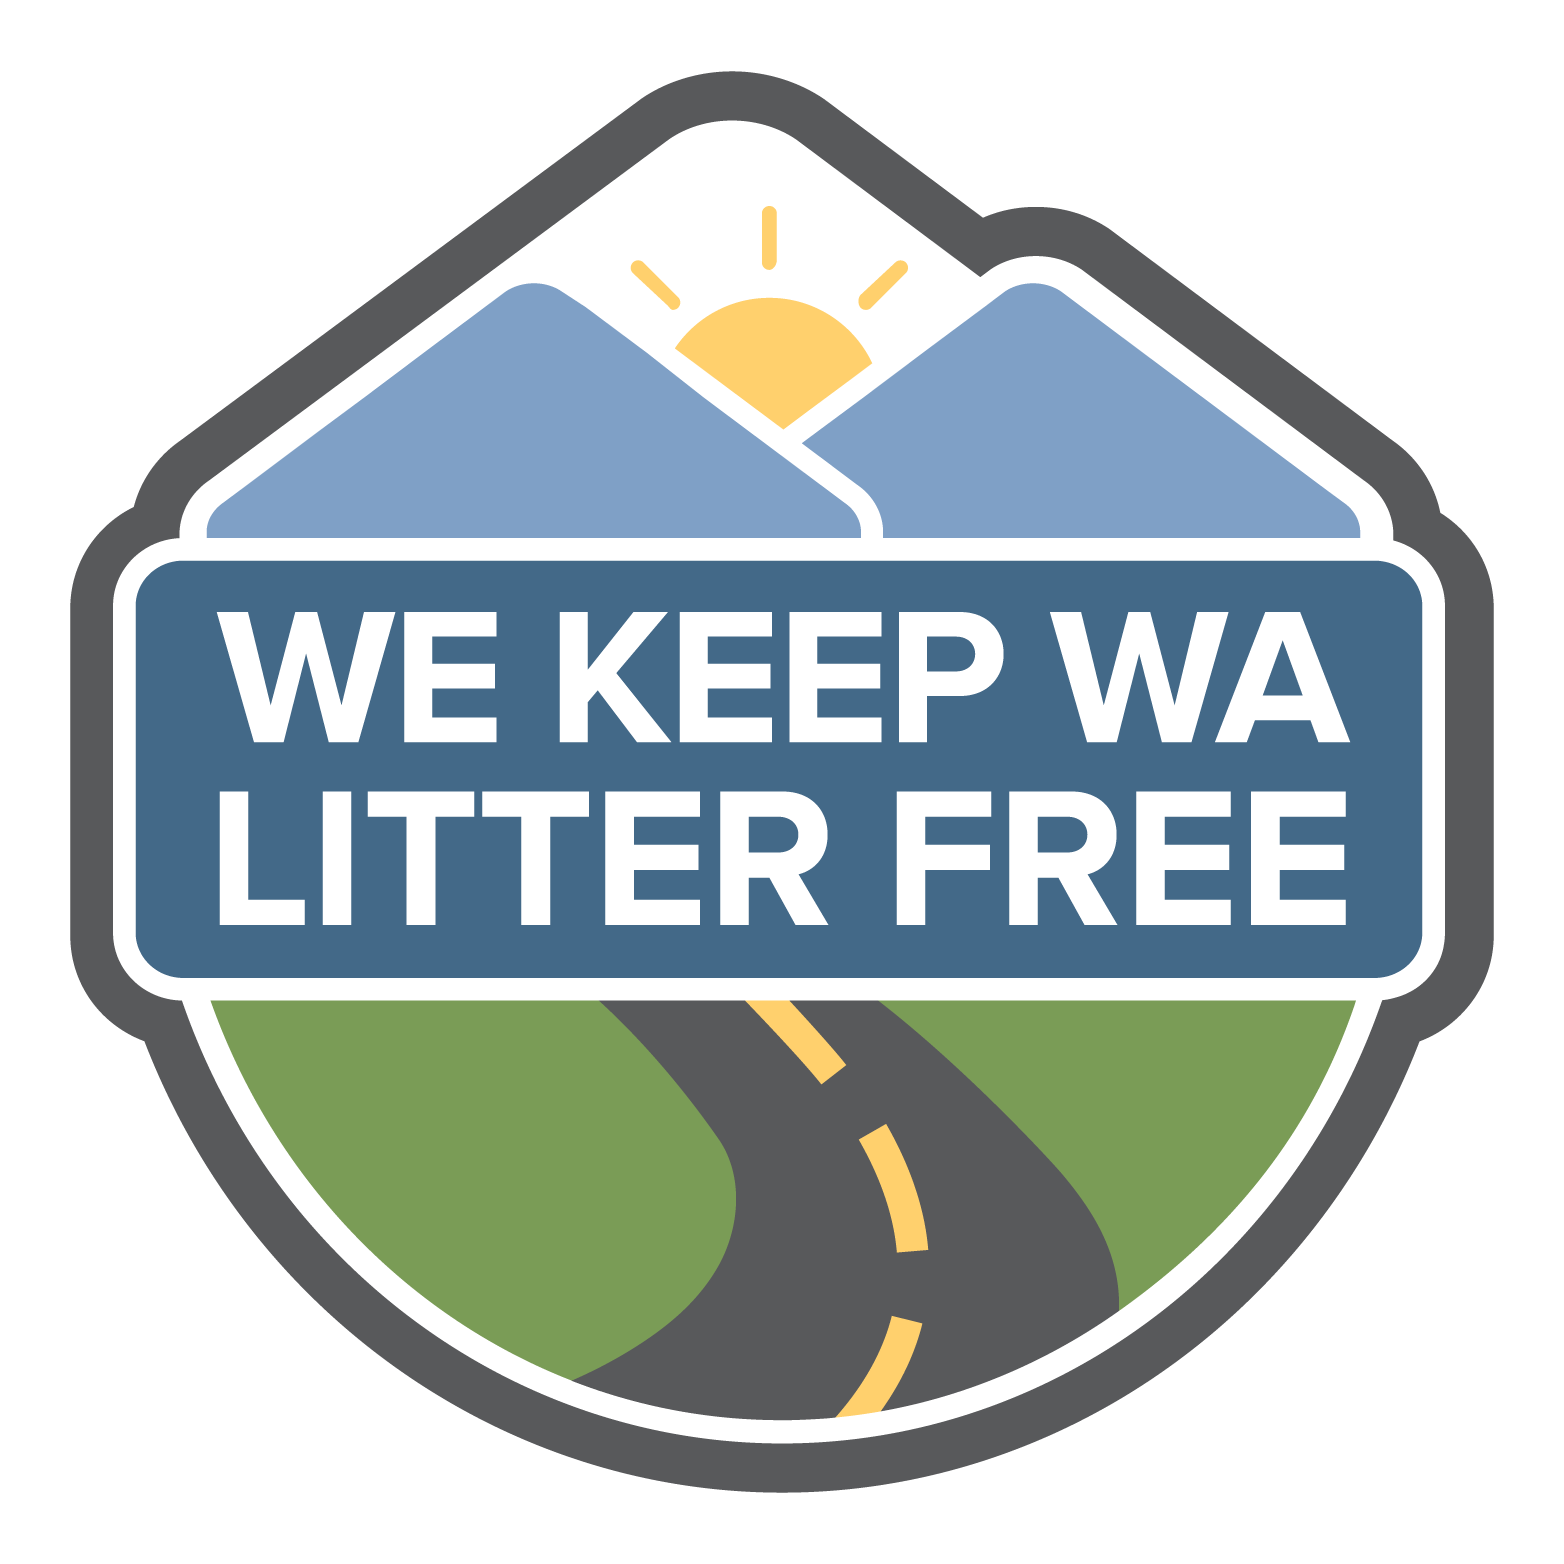 The logo for the We Keep WA Litter Free campaign: A yellow sun setting (or rising) over mountains and a highway.